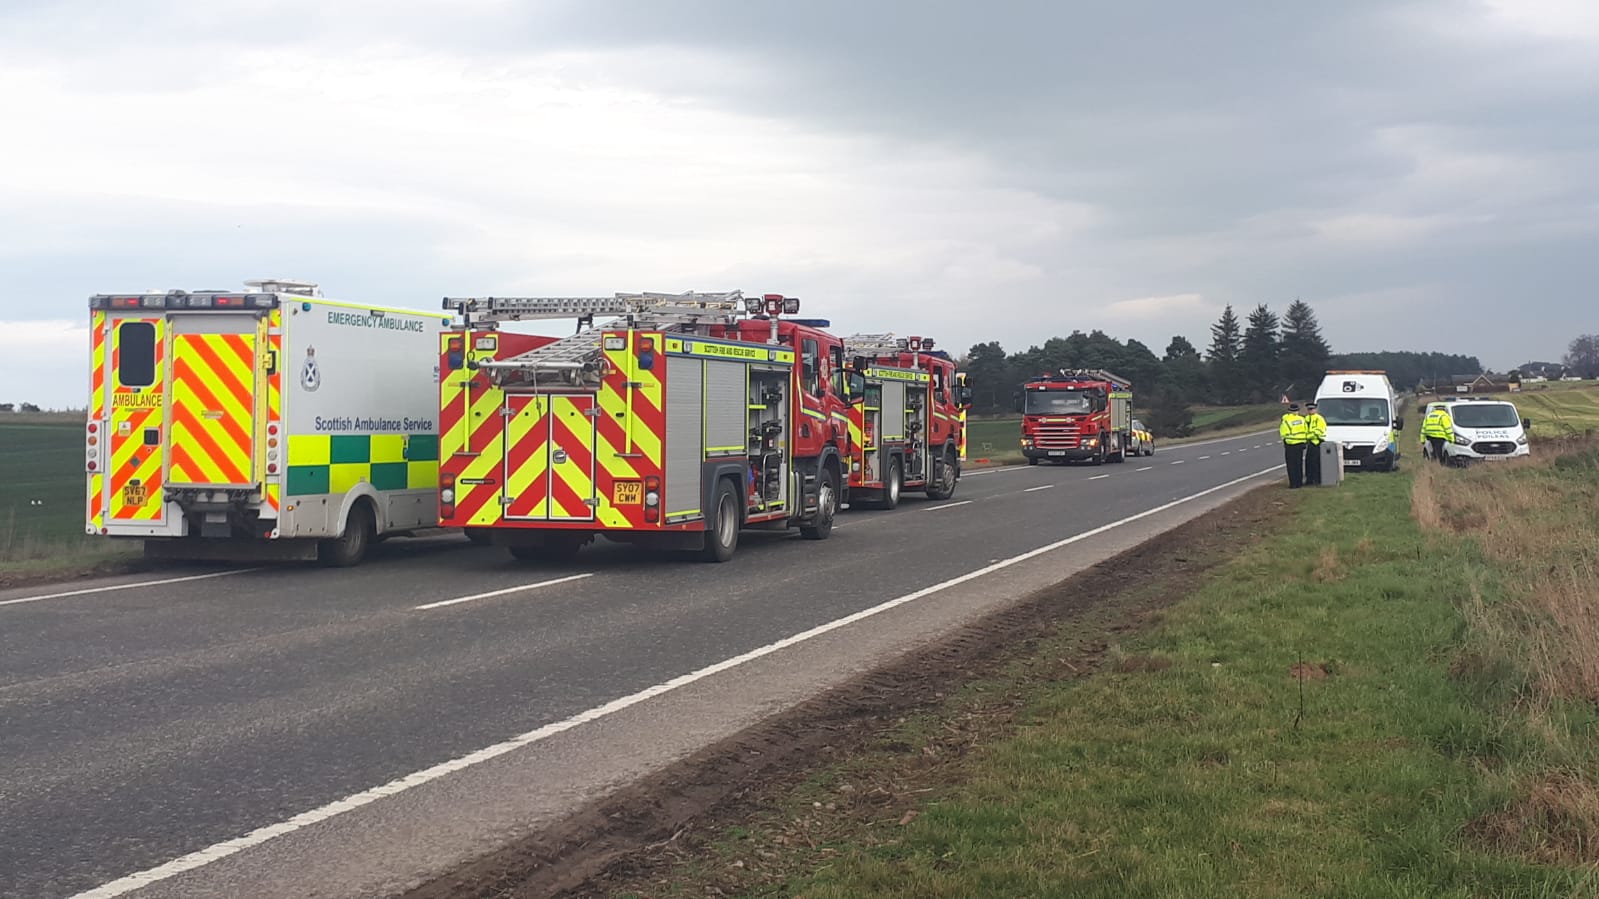 Police are in attendance at an single road traffic accident on the A96 Inverness to Nairn Road, at Dalcross.